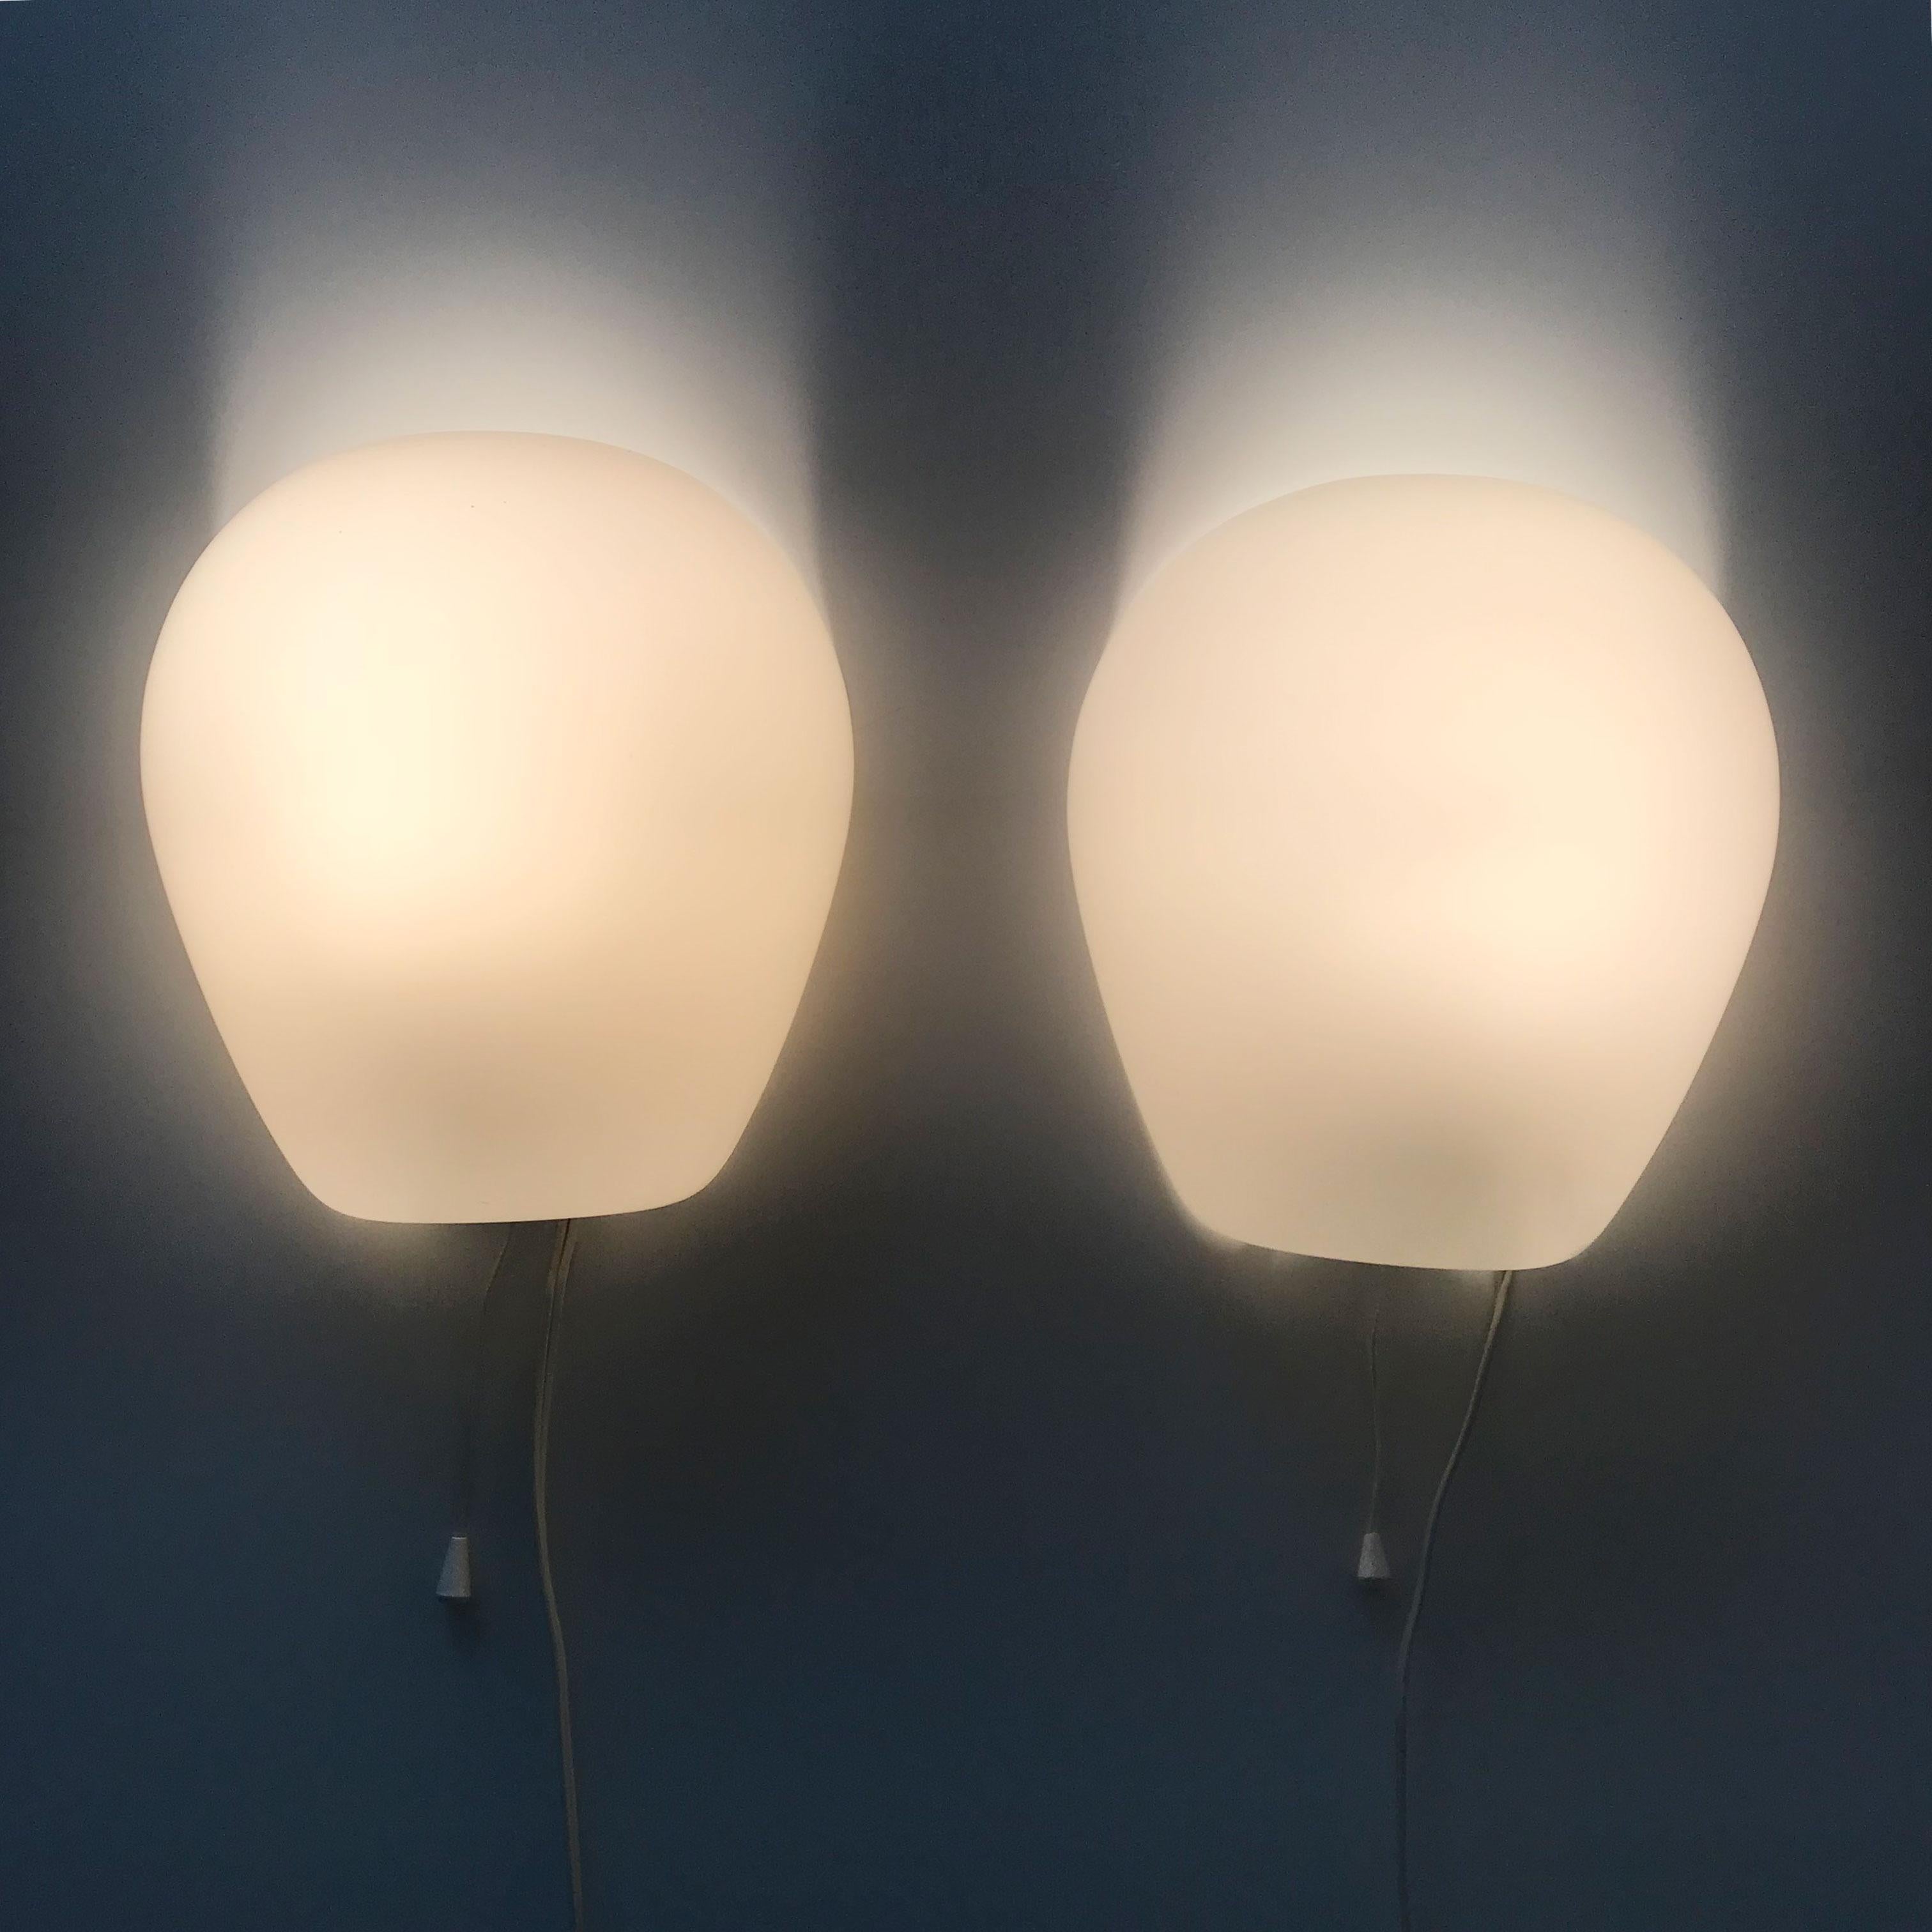 Set of two elegant Mid-Century Modern wall lamps or sconces 'wall shell 2681'. Designed by the famous German Designer Wilhelm Wagenfeld in 1952. Manufactured by Peill & Putzler in 1950s, Germany.

These elegant wall lamps are executed in shell